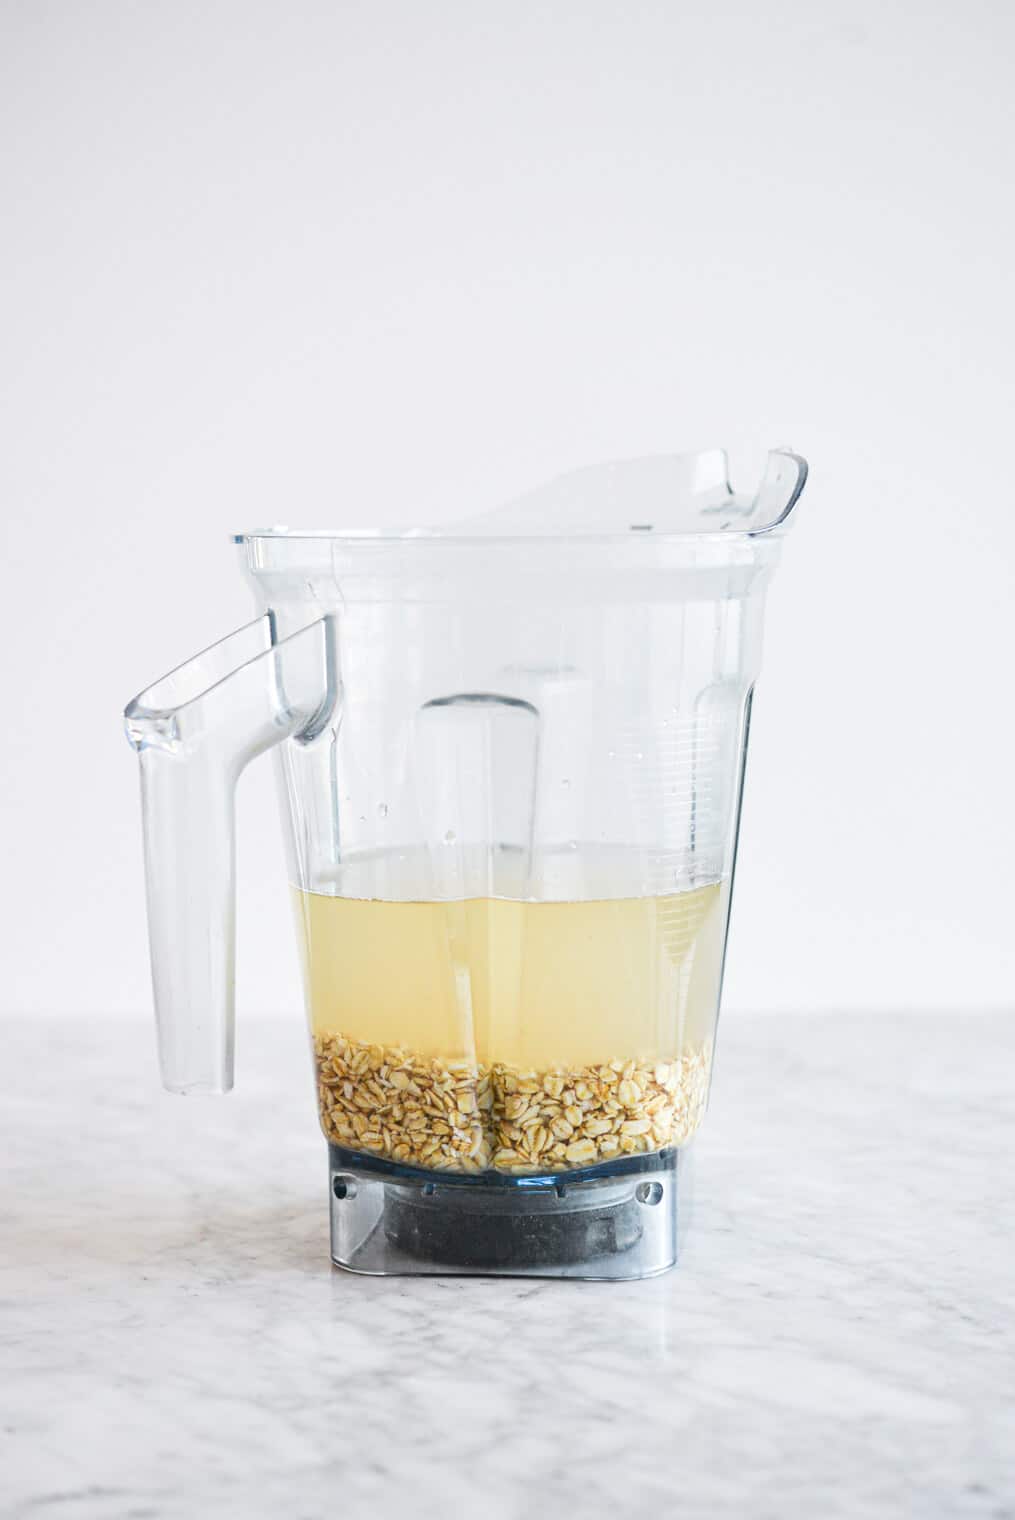 Blender filled with oats and topped with water.